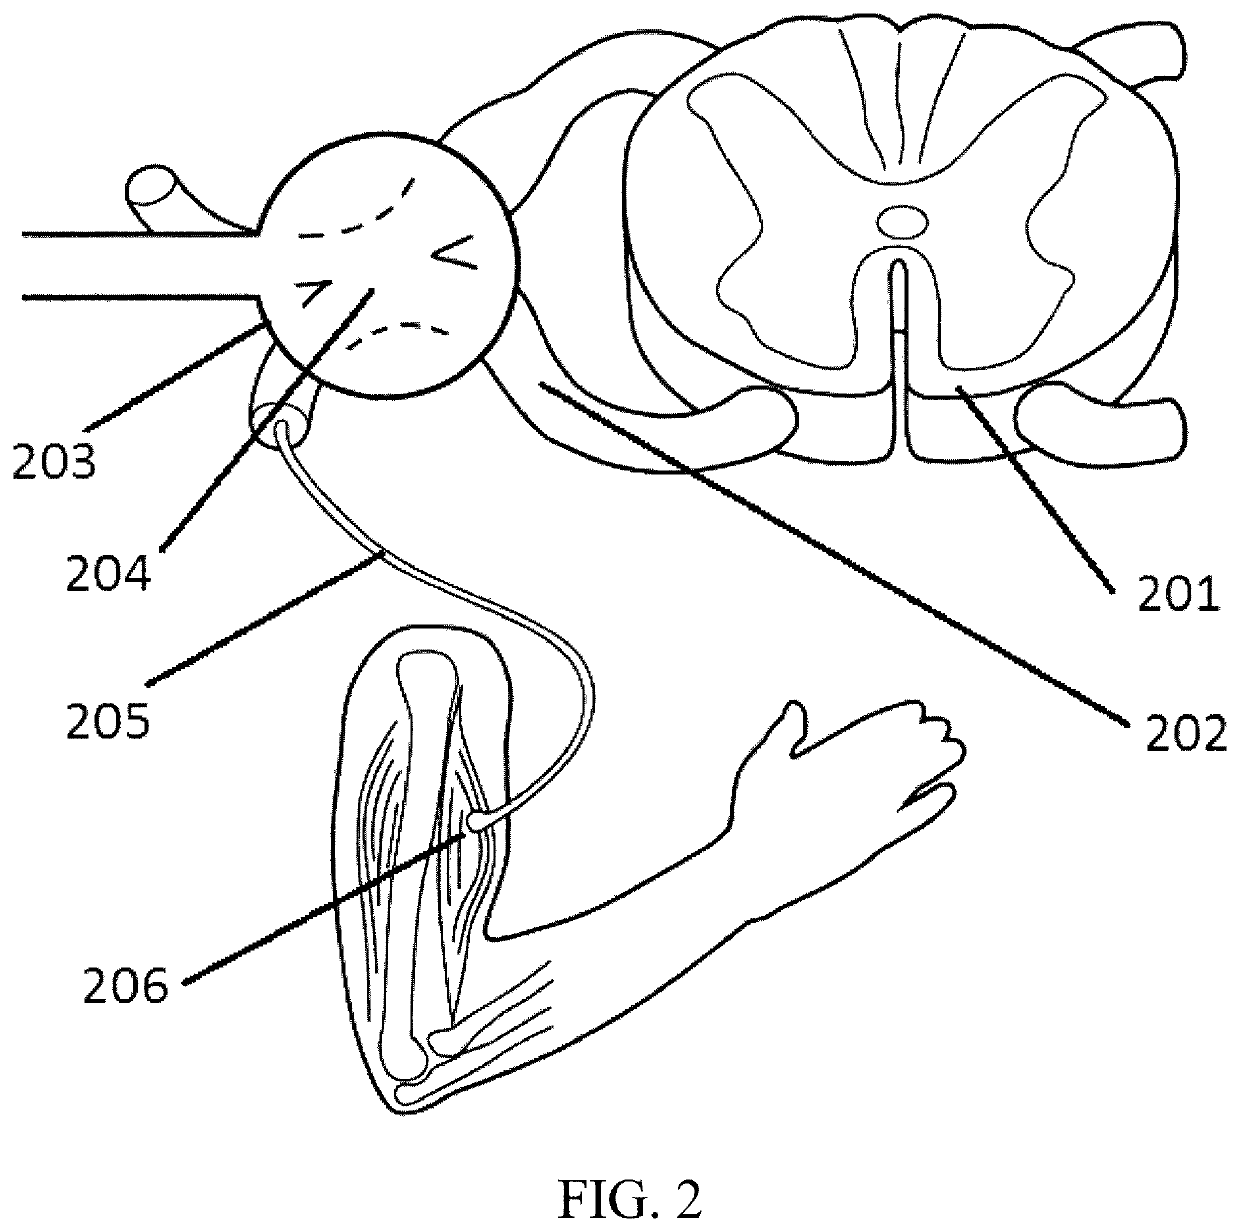 Systems and methods for spasticity treatment using spinal nerve magnetic stimulation